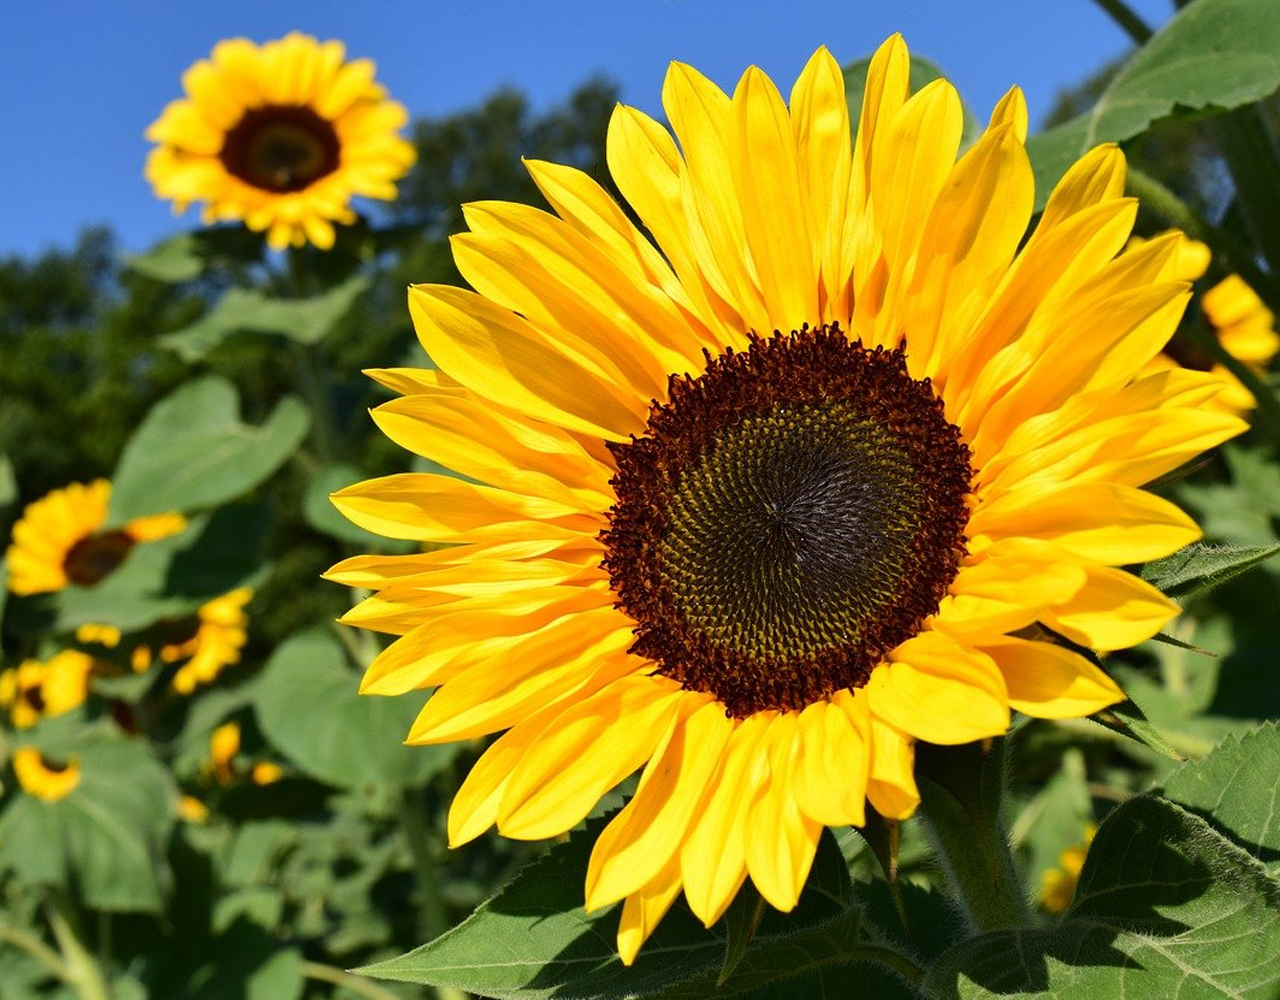 Sunflowers - Your garden in April